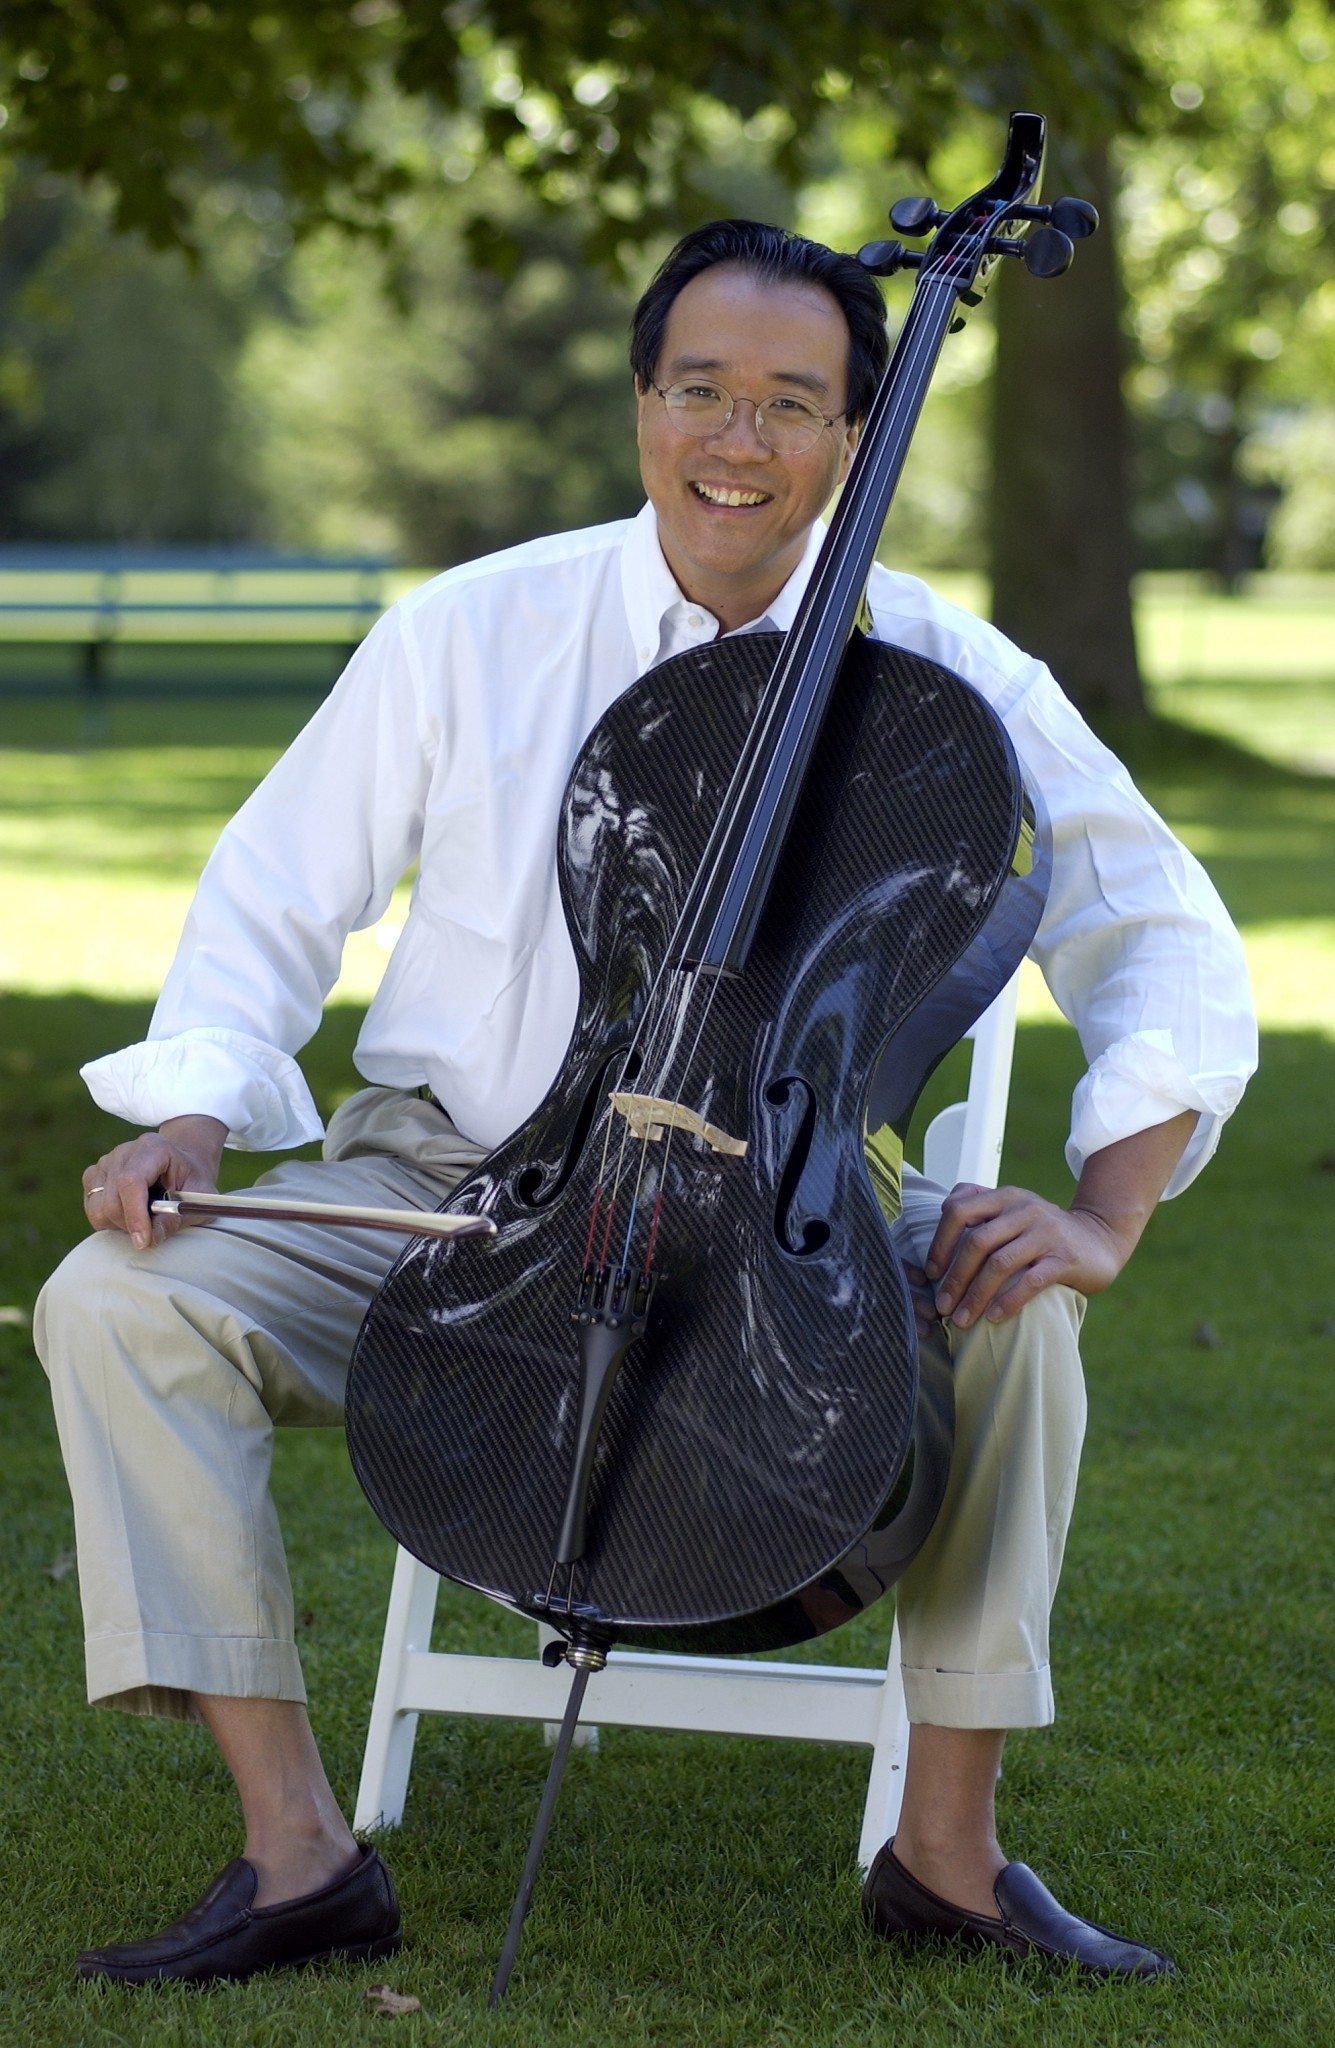 Ma - Luis and Clark | The Finest Carbon Fiber Stringed Instruments